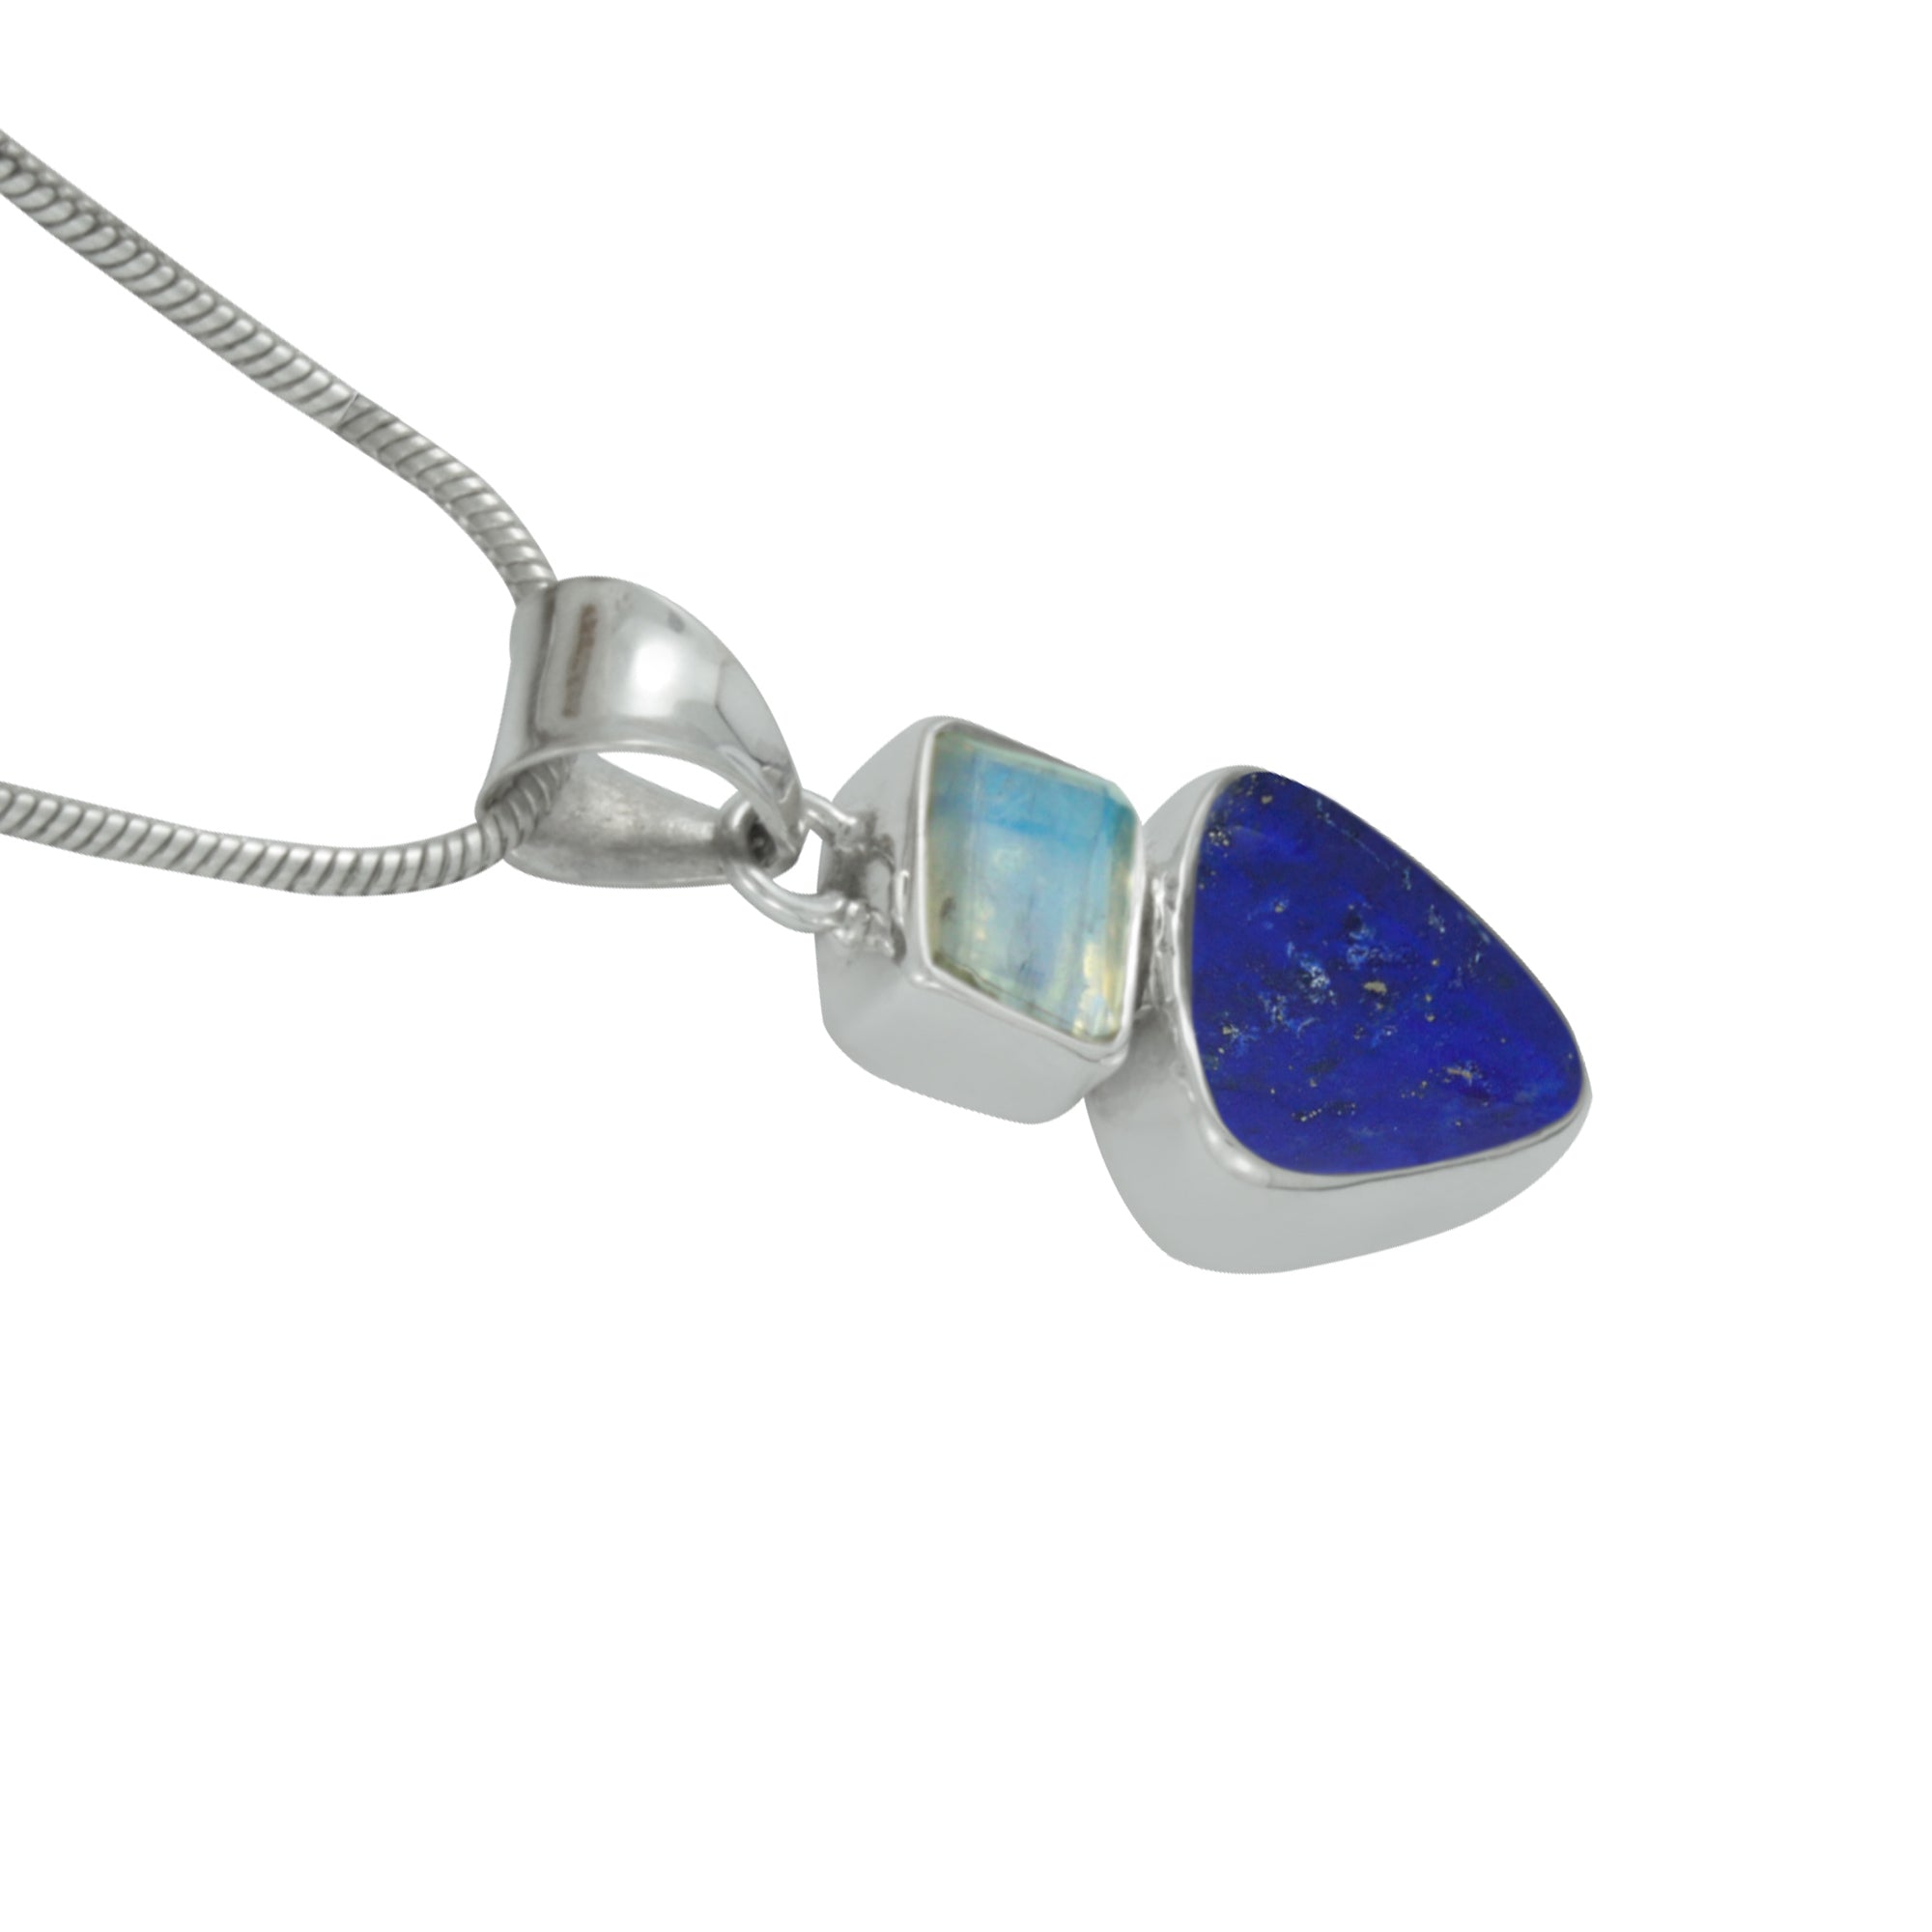 Every Day Elegance  featuring this Rainbow Moonstone and Lapis Lazuli sterling silver pendant